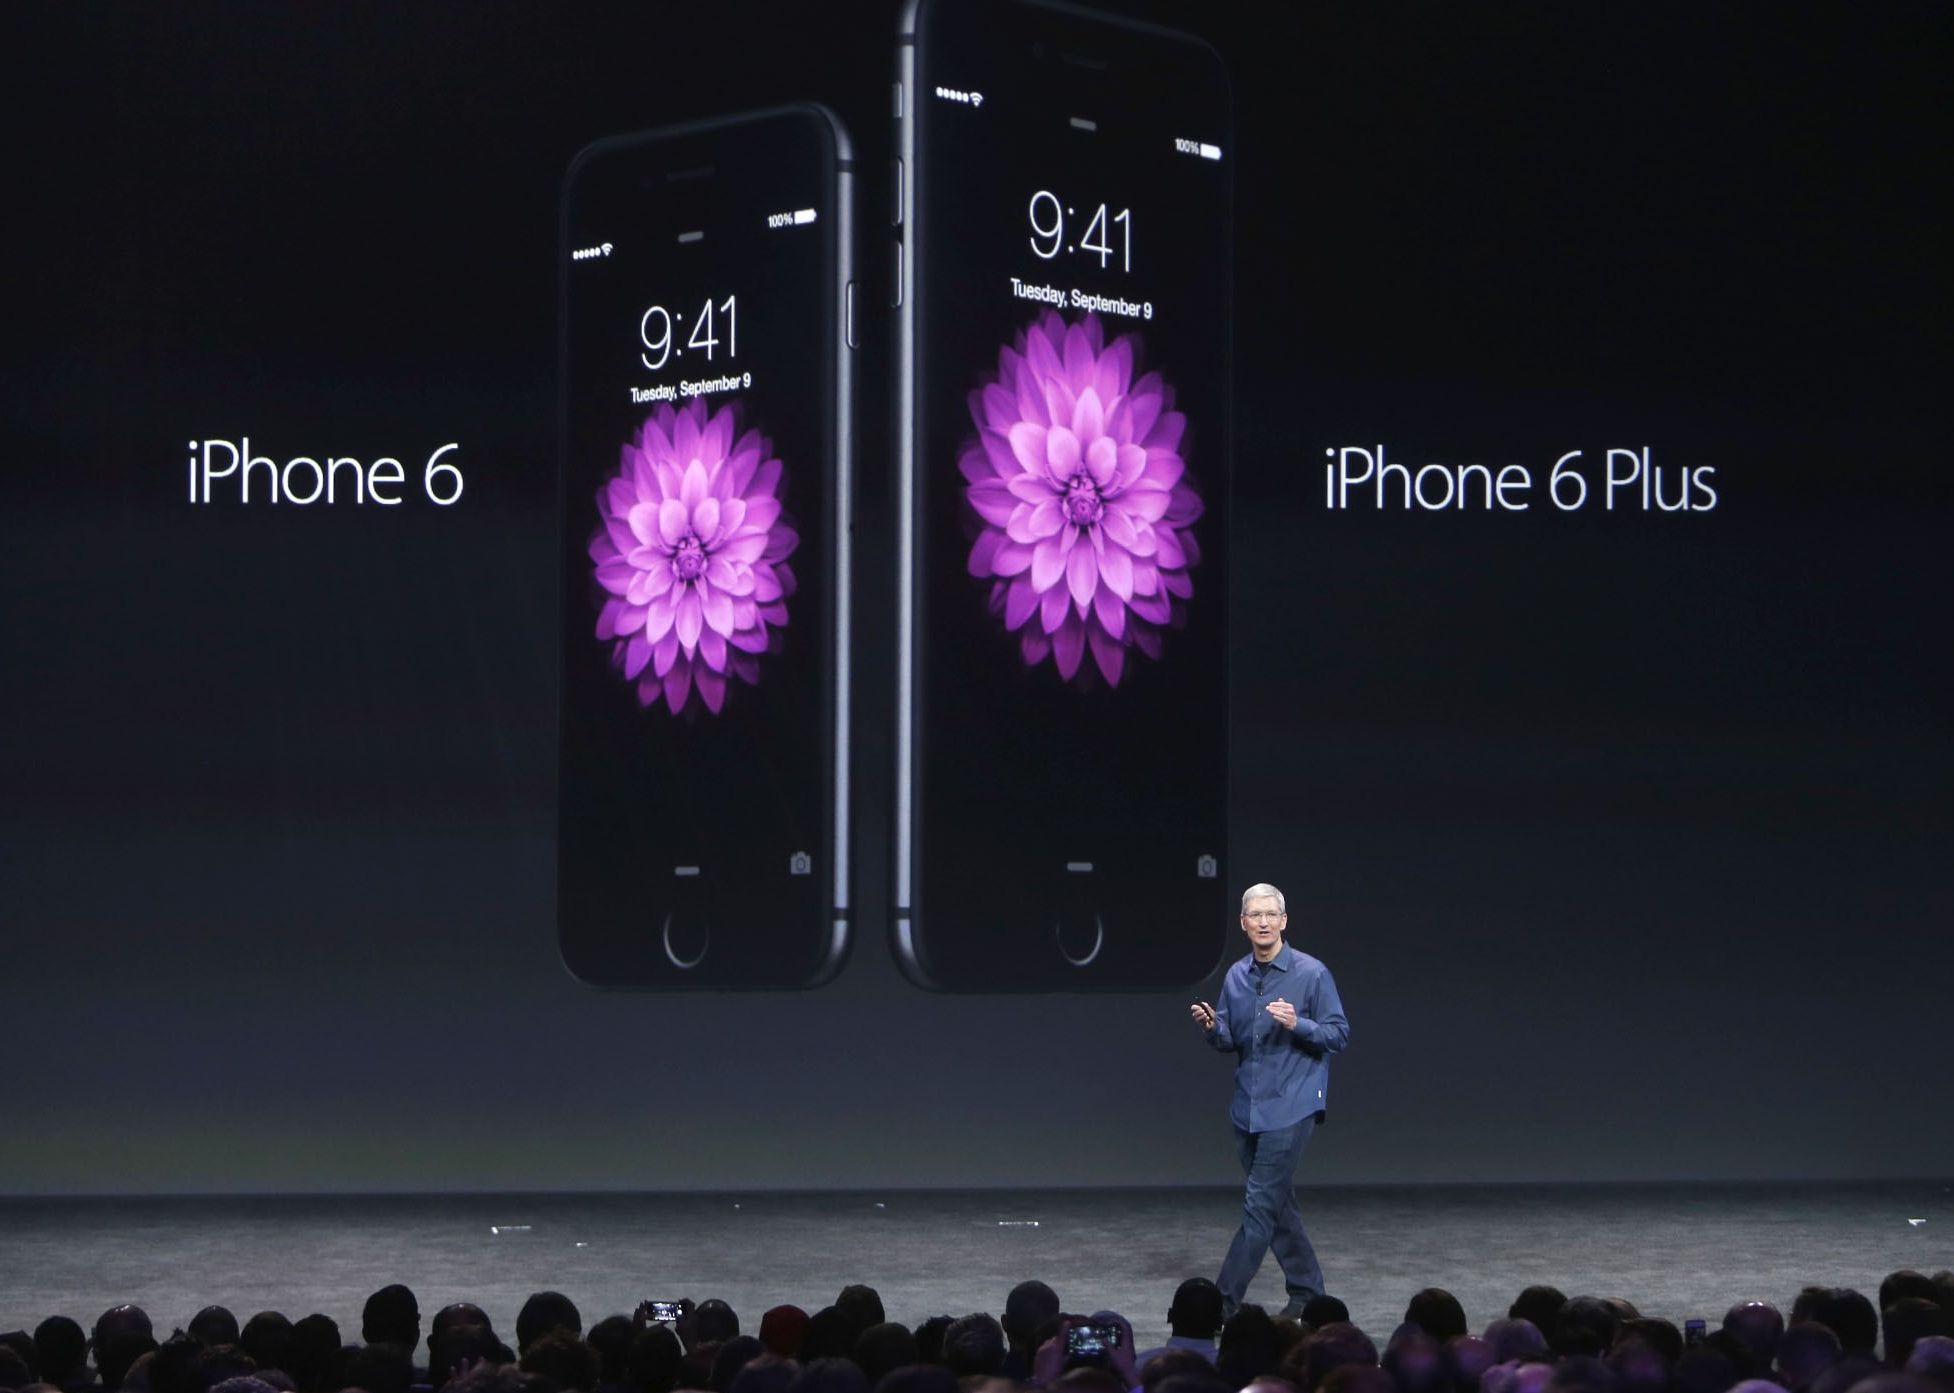 Apple CEO Tim Cook pictured on stage talking about the iPhone 6 and iPhone 6 Plus